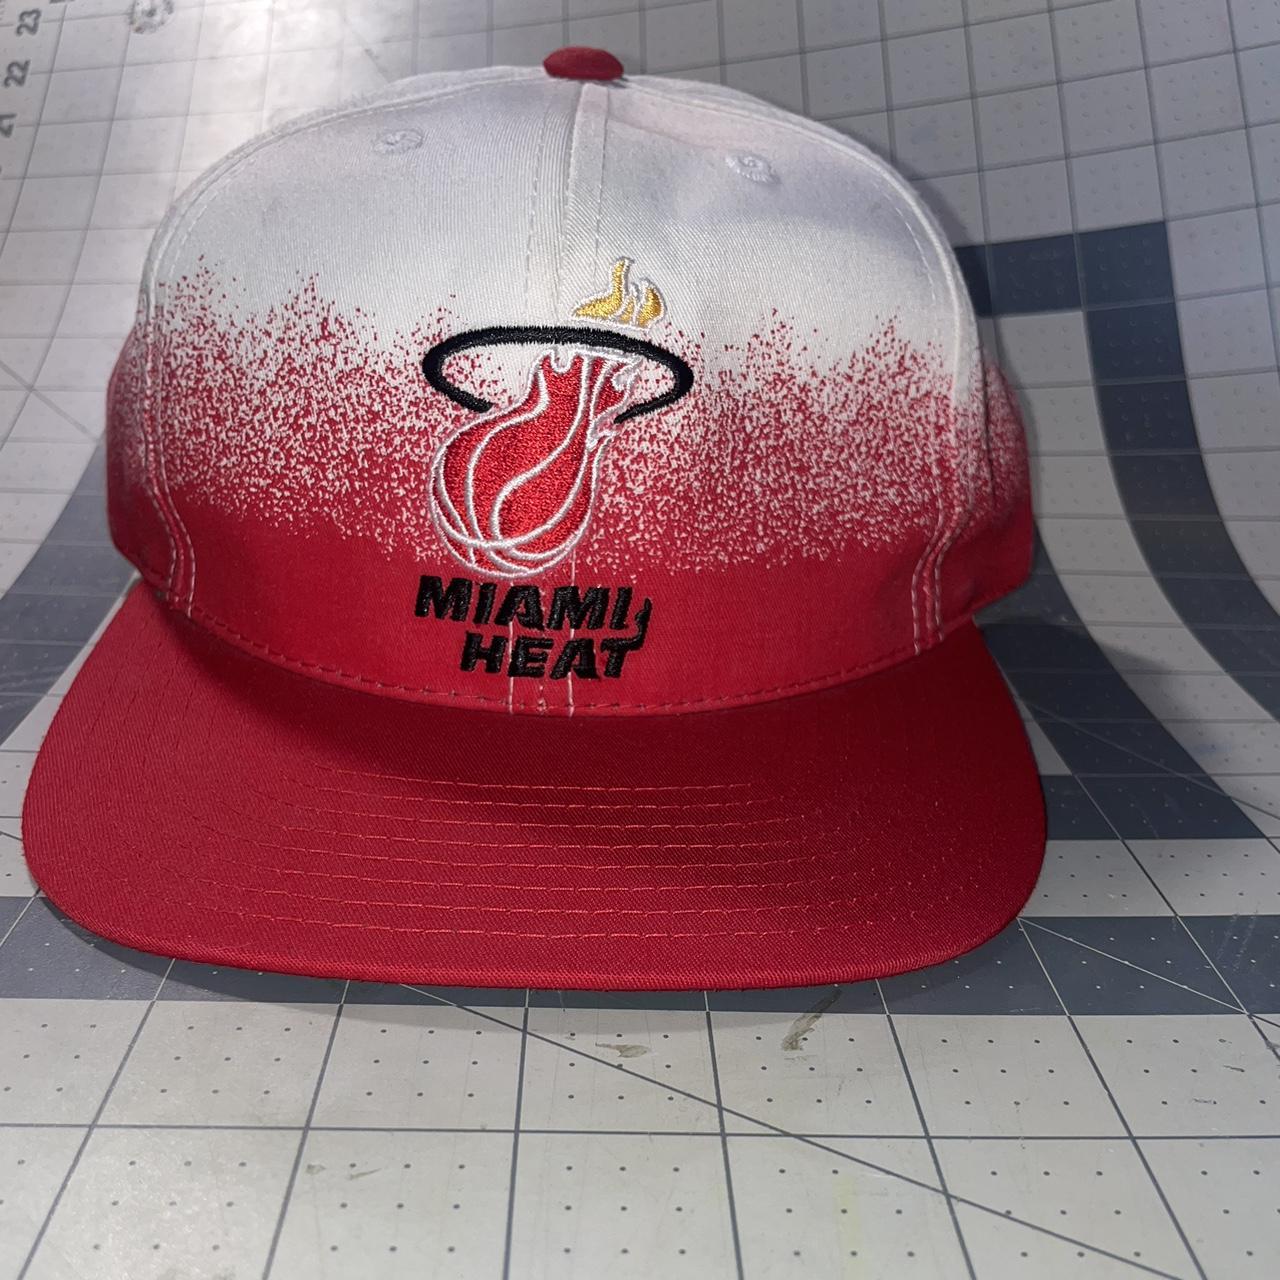 Men's Red and White Hat